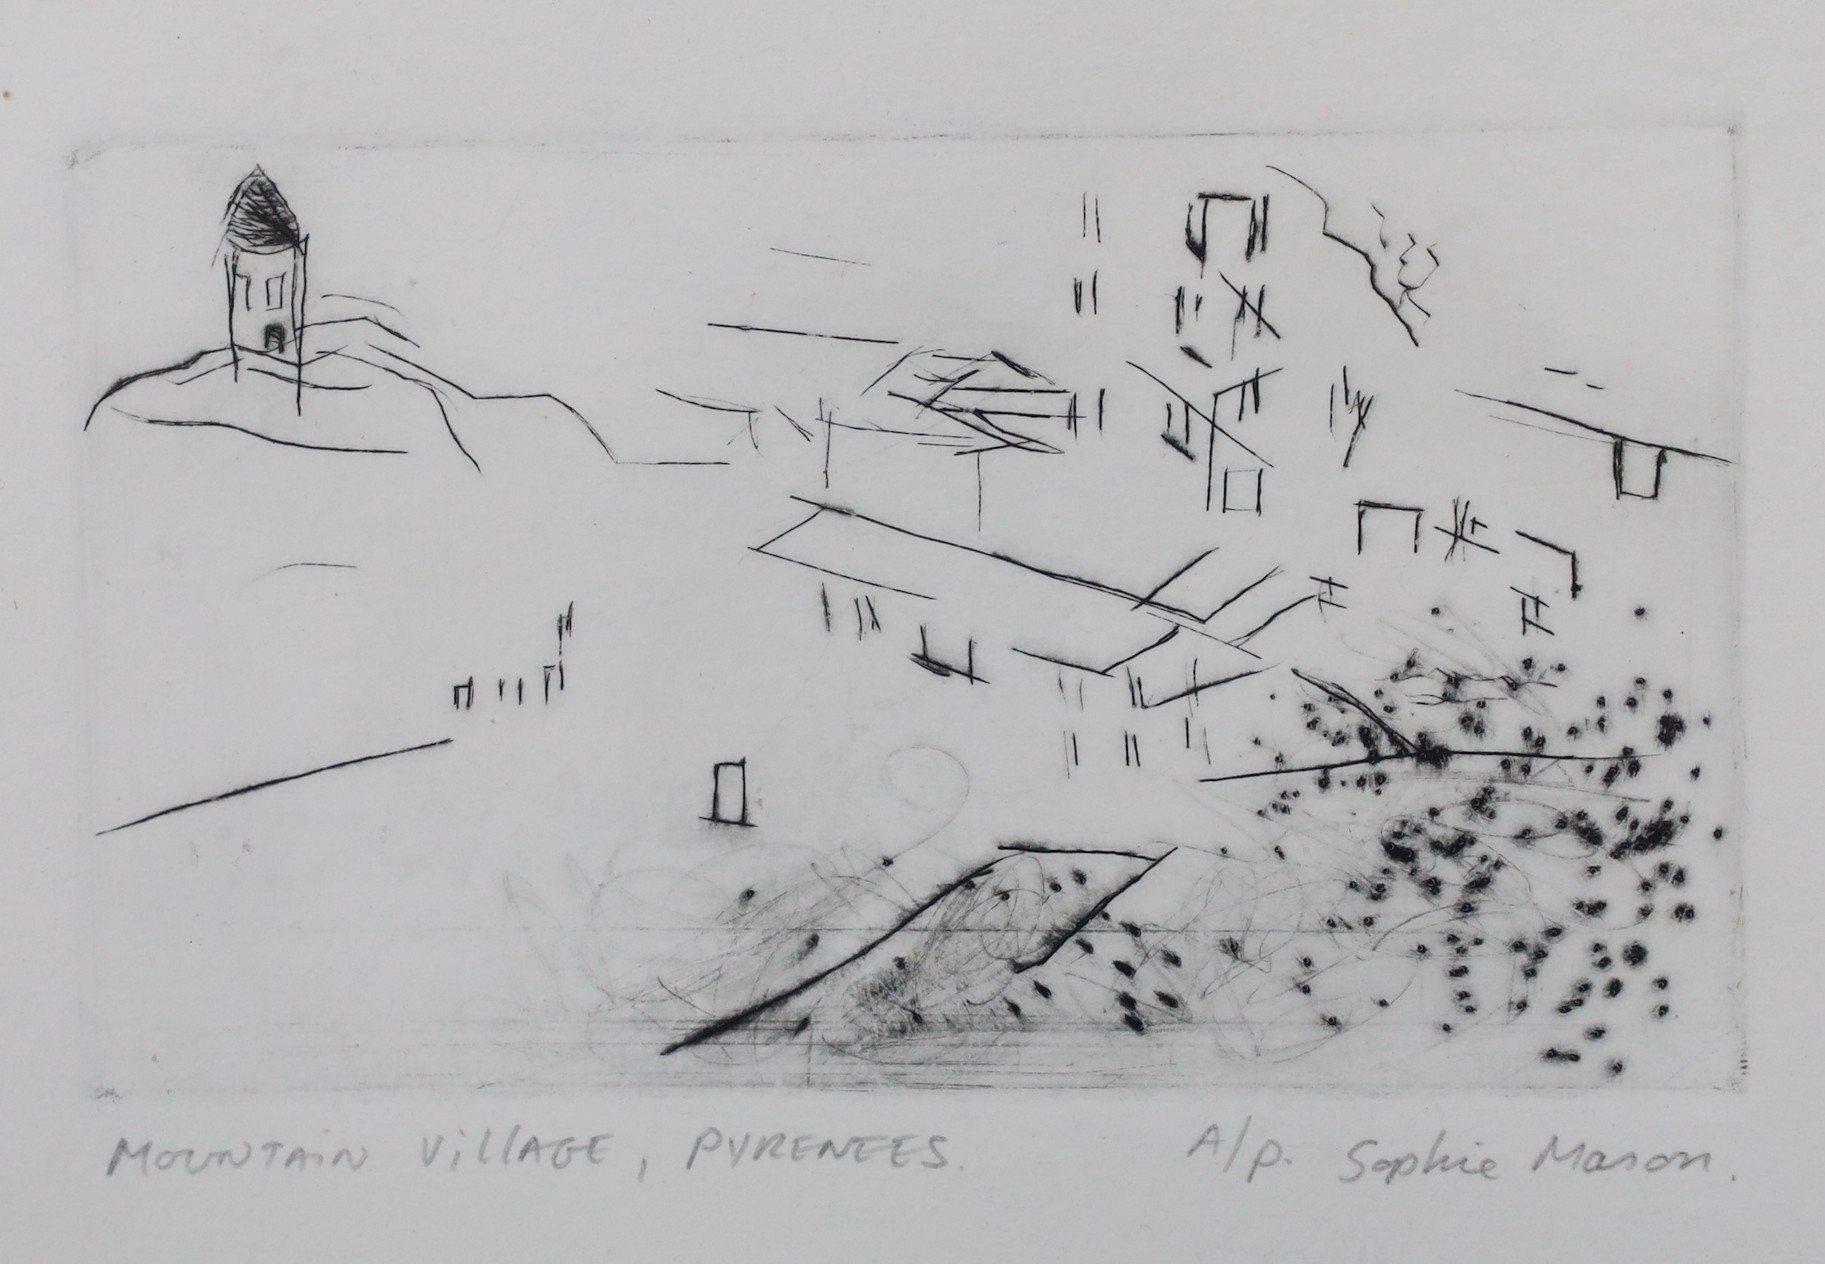 Sophie Mason (contemporary), artist proof etching, Mountain village, Pyrenees, signed and titled in pencil, 8 x 14cm